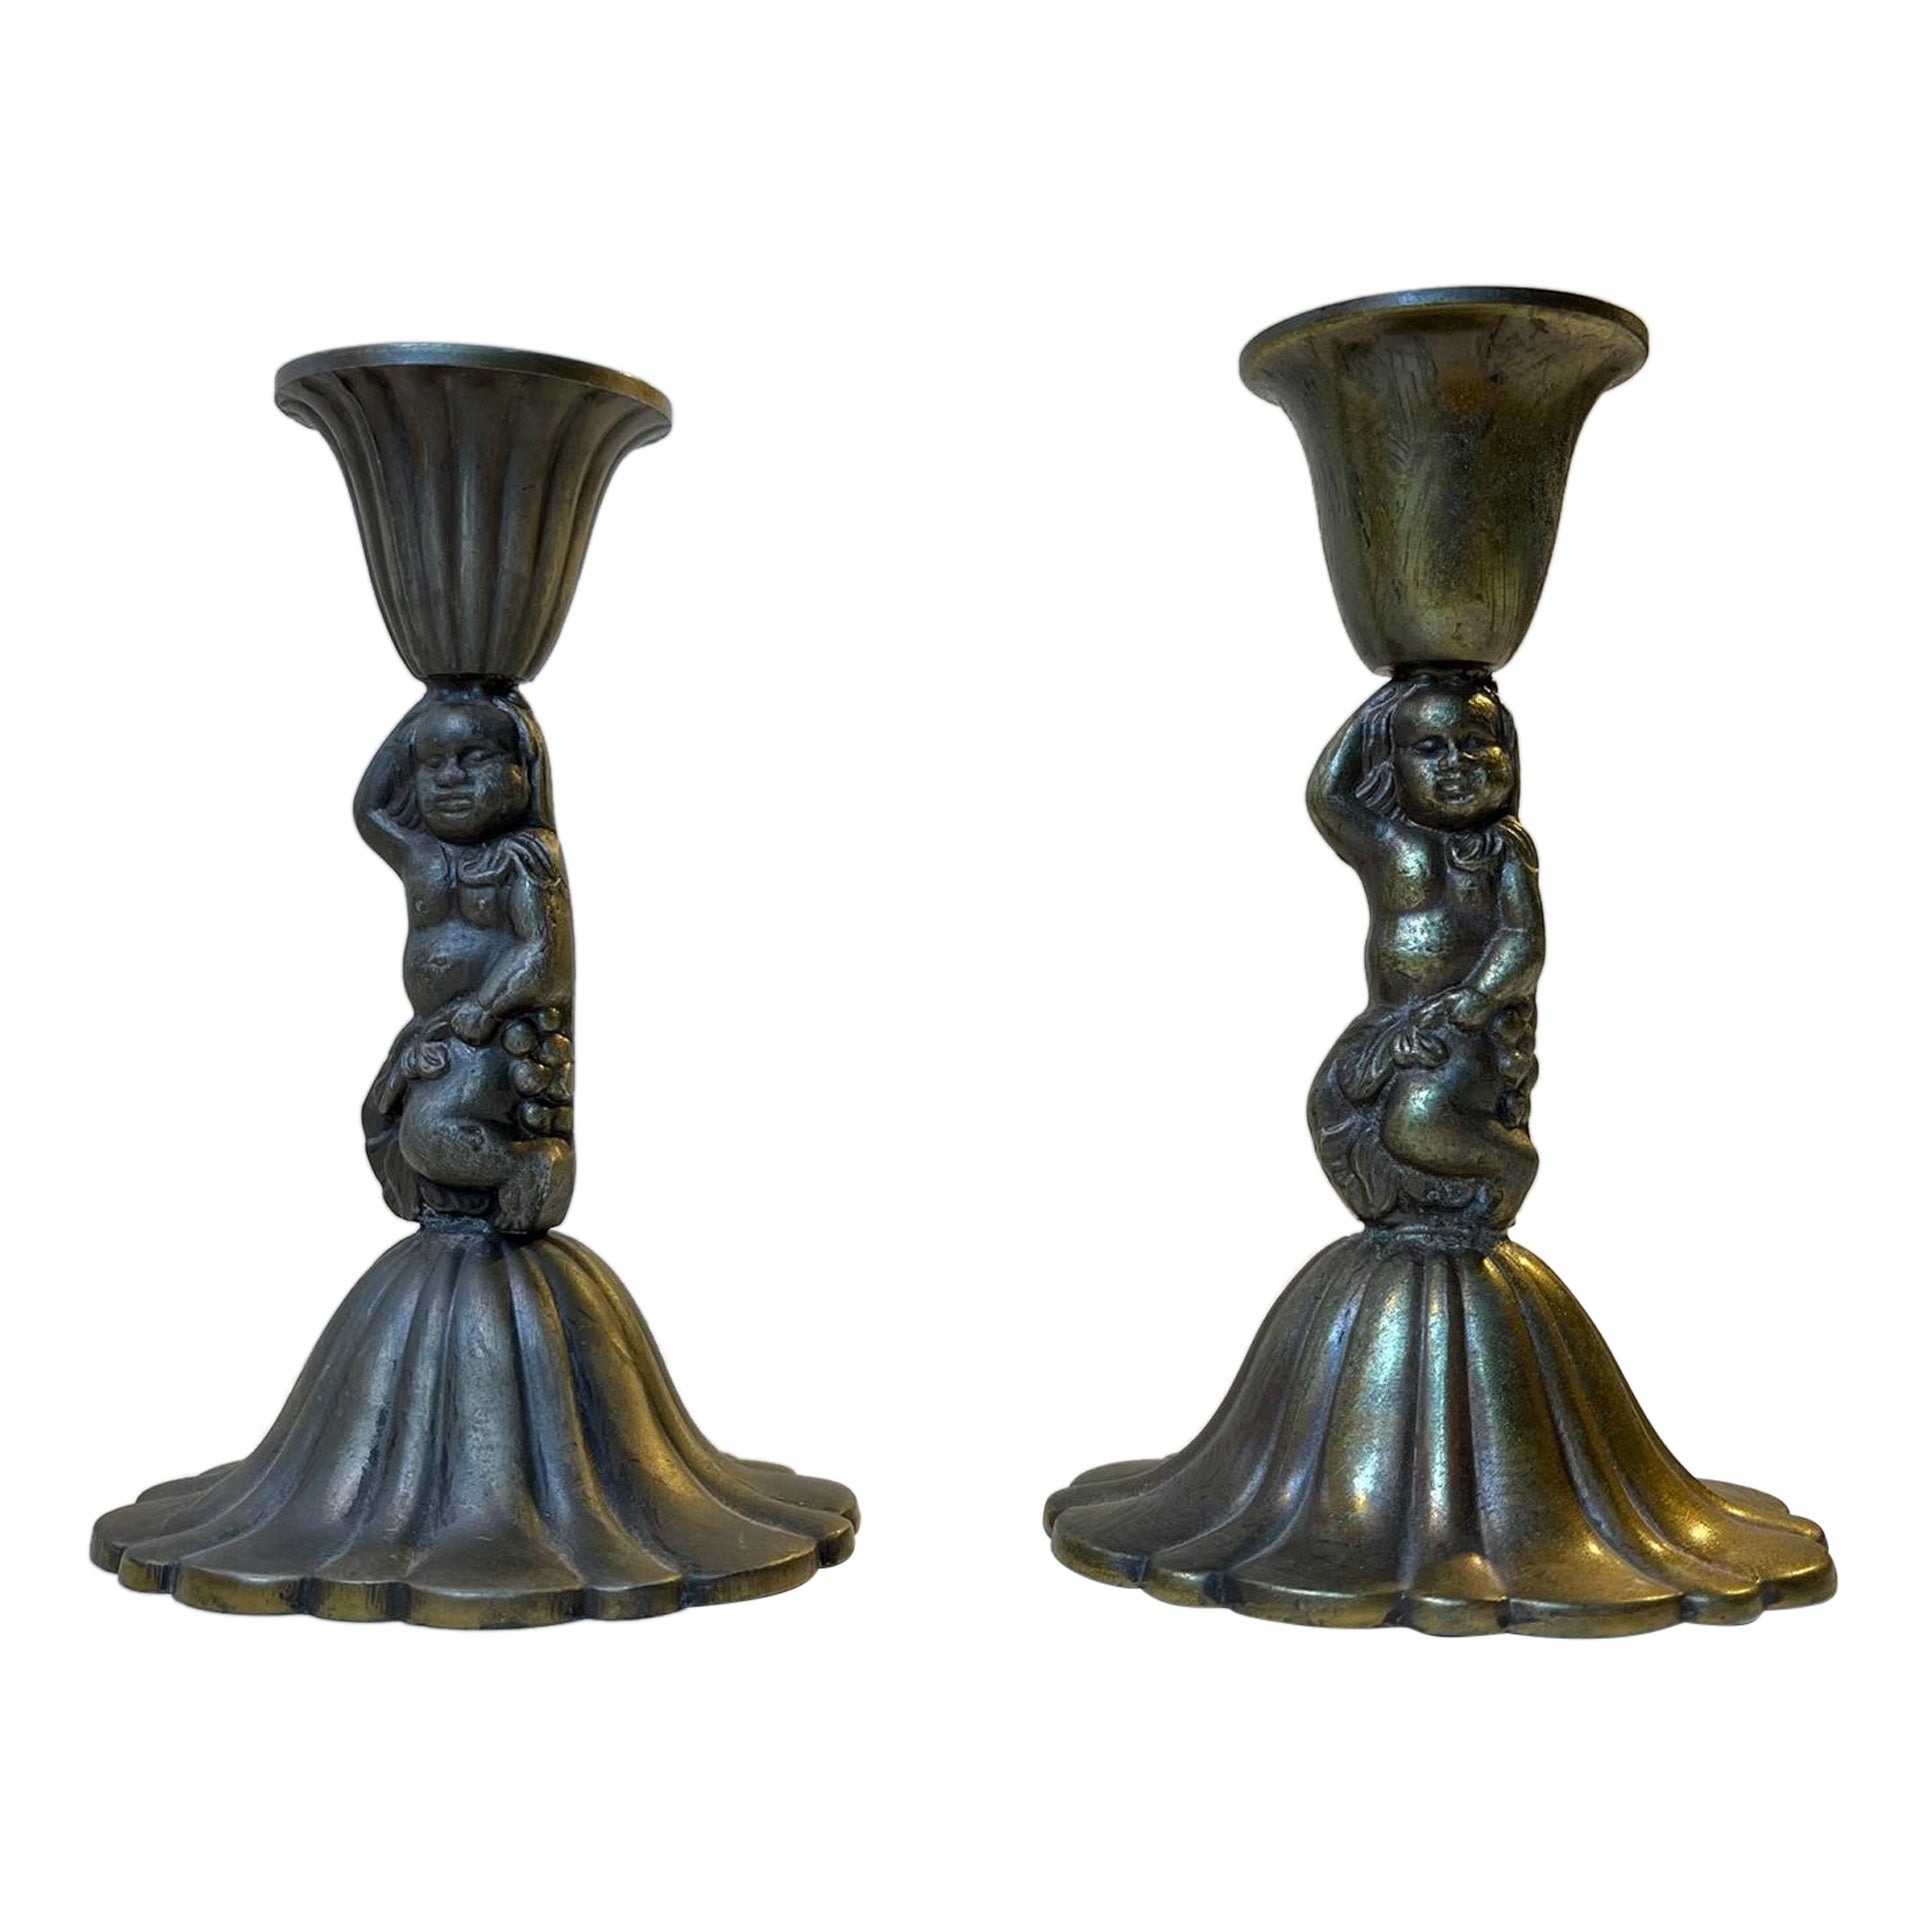 Vintage Italian Candleholders with Cherubs, 1940s For Sale